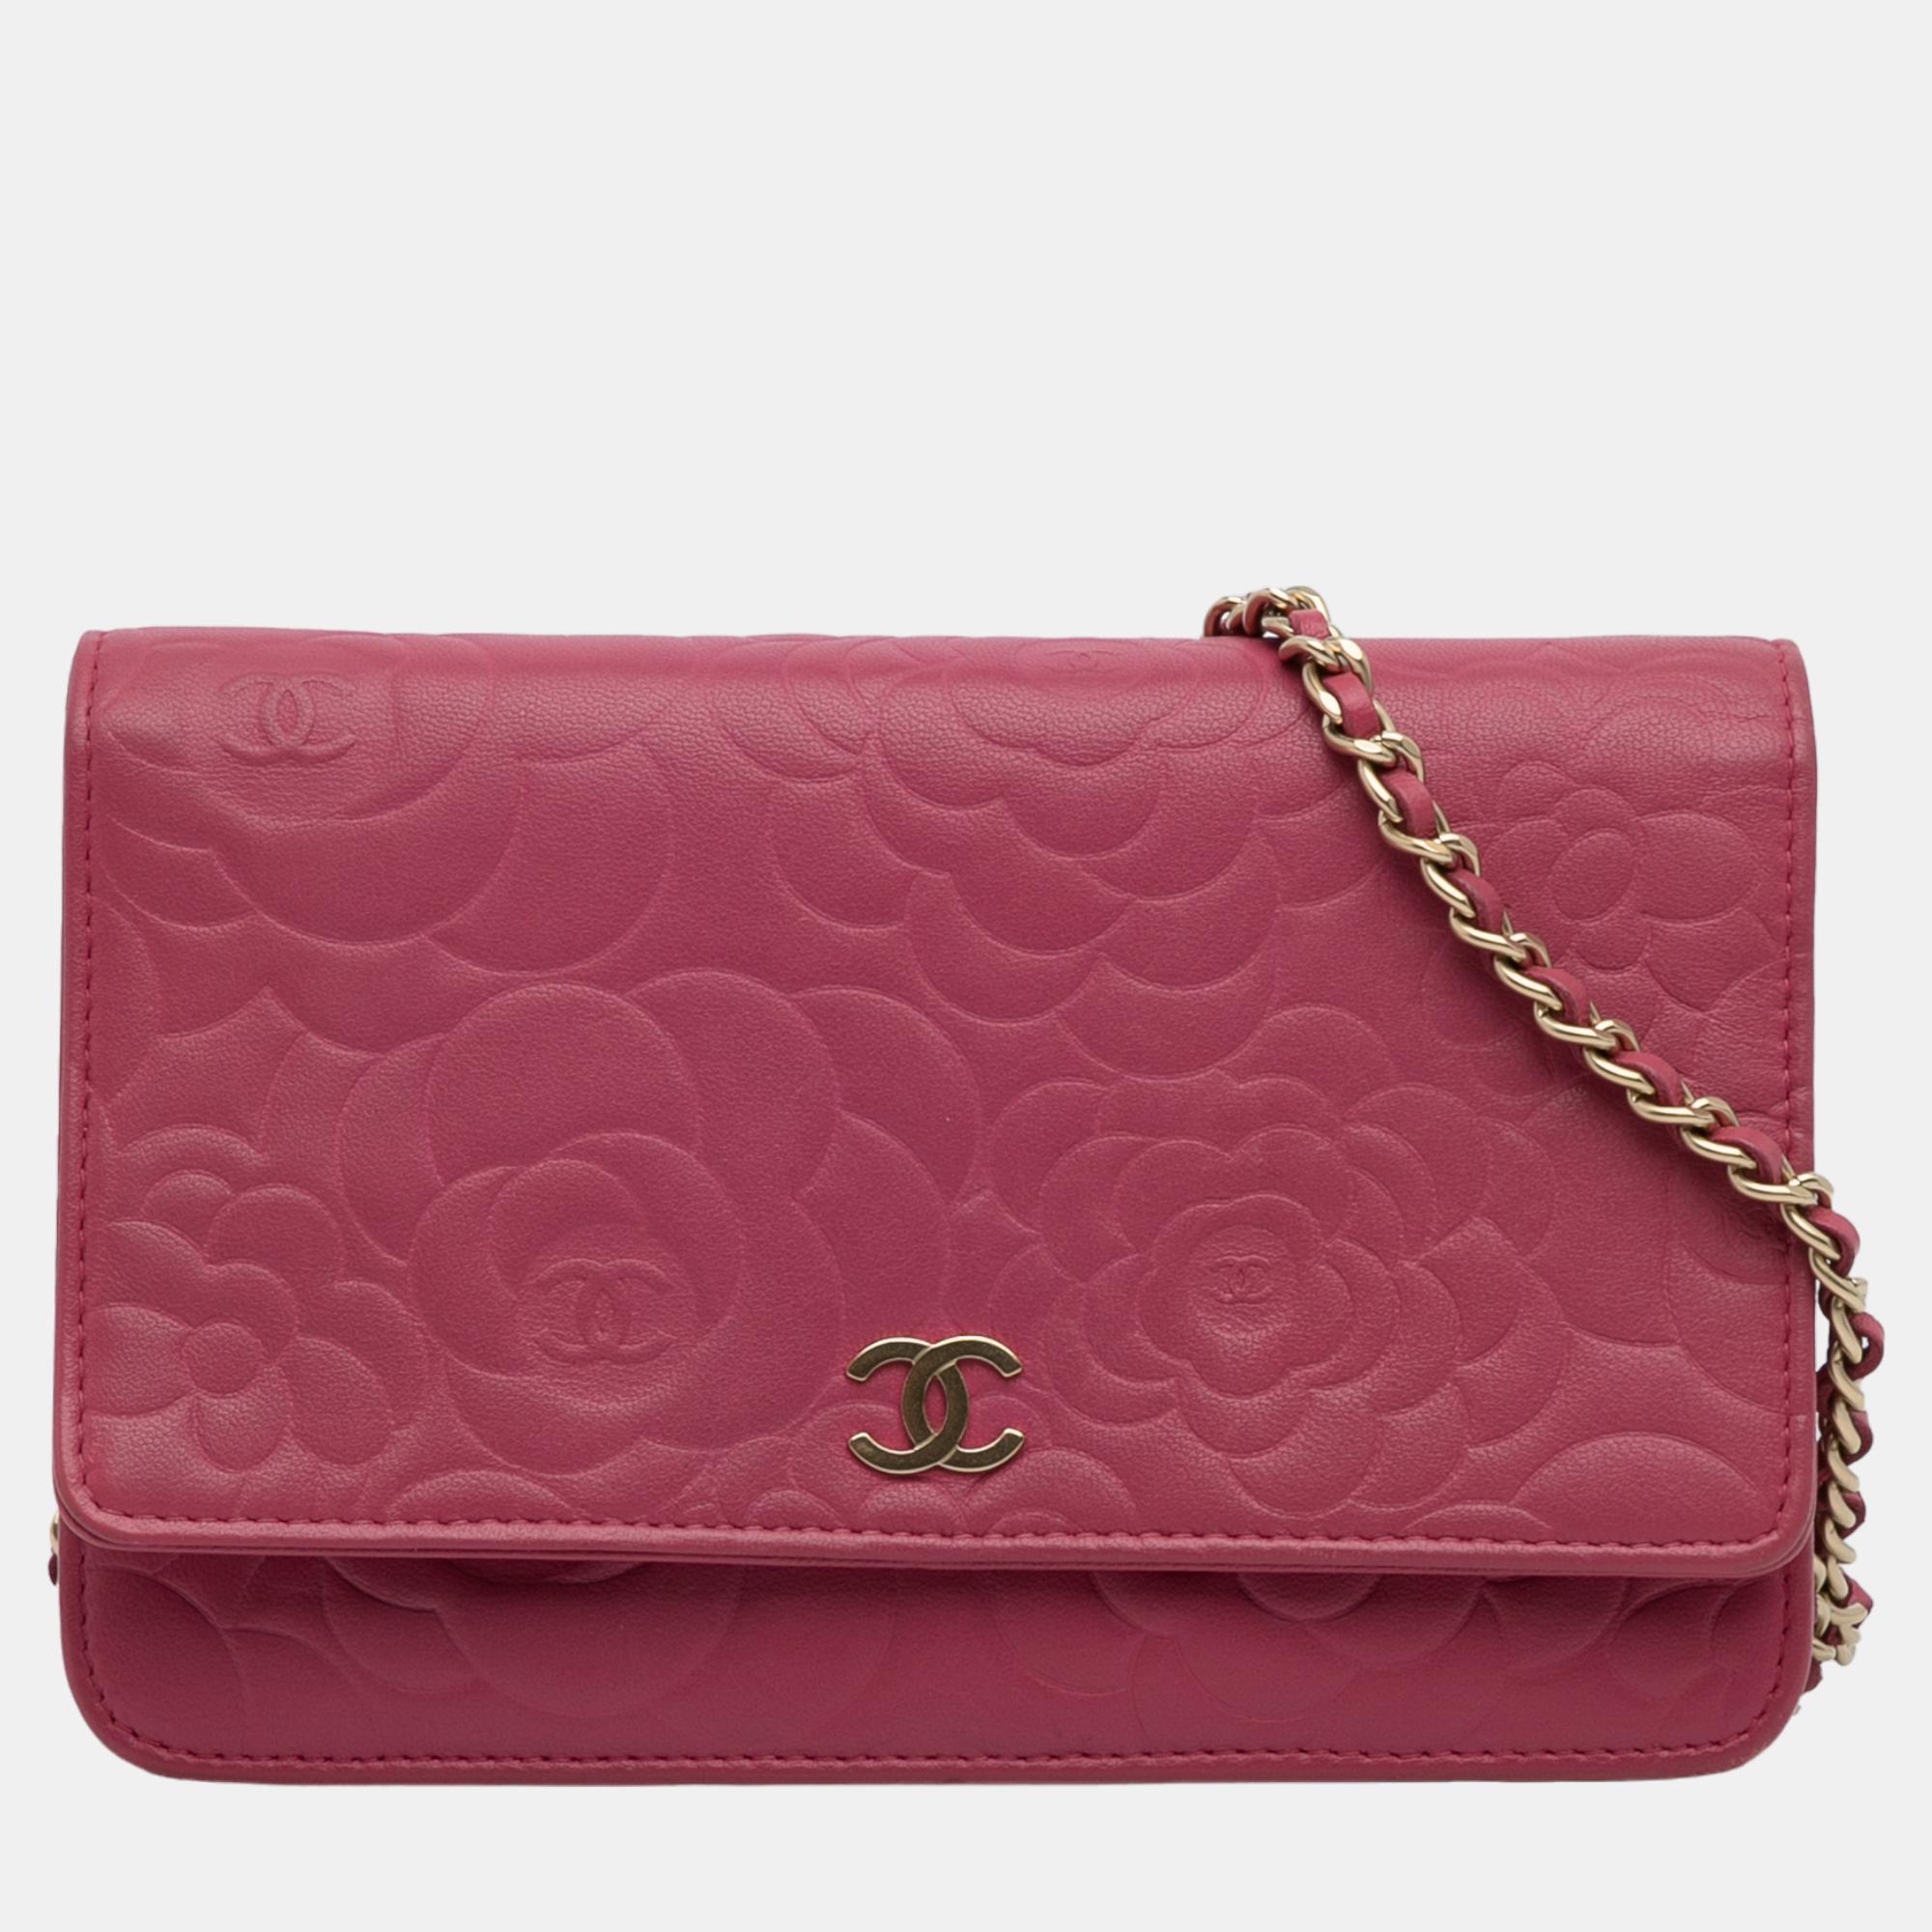 Chanel pink camellia wallet on chain